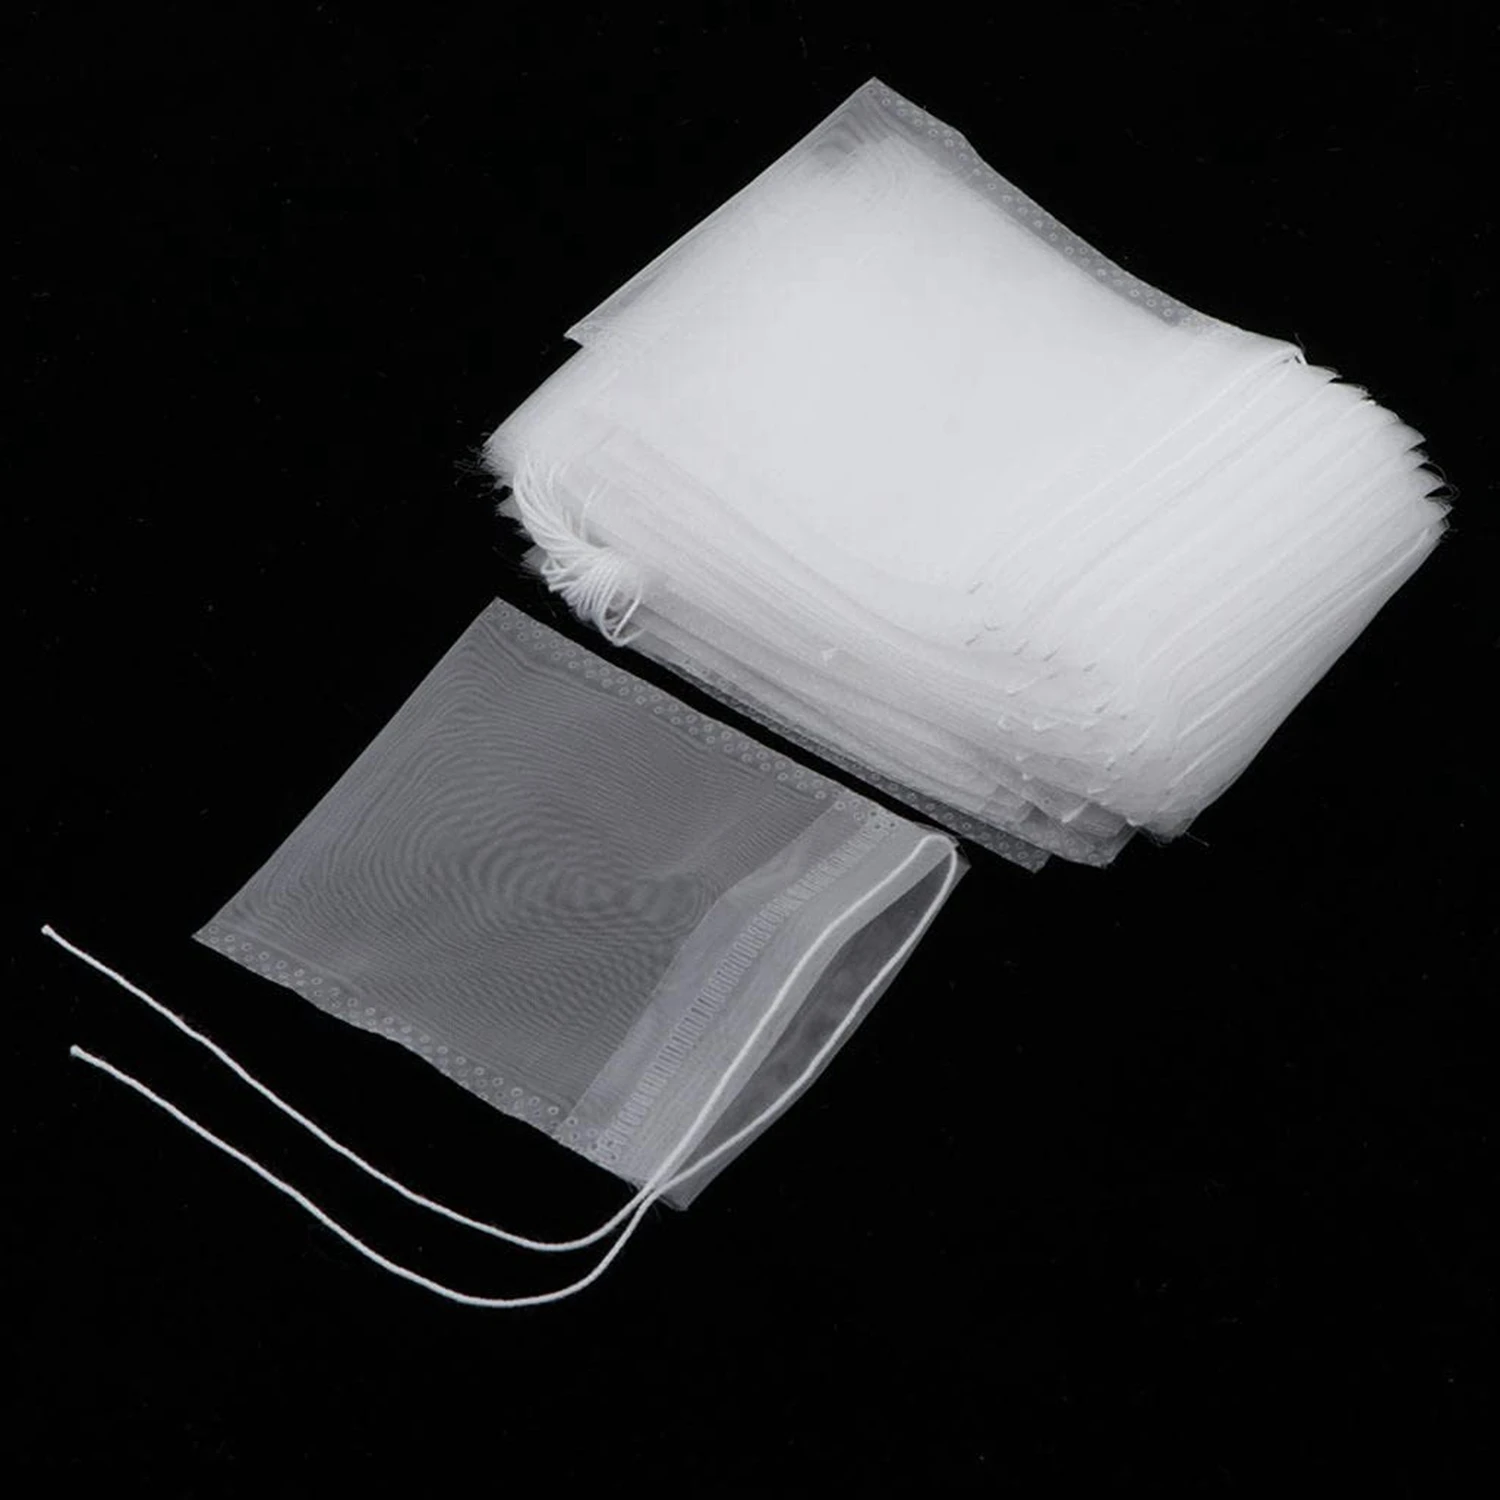 50/100 Pcs Transparent Disposable Tea Bags Filter Bags for Tea Infuser with String Heal Seal Food Grade Nylon Spice Teabags